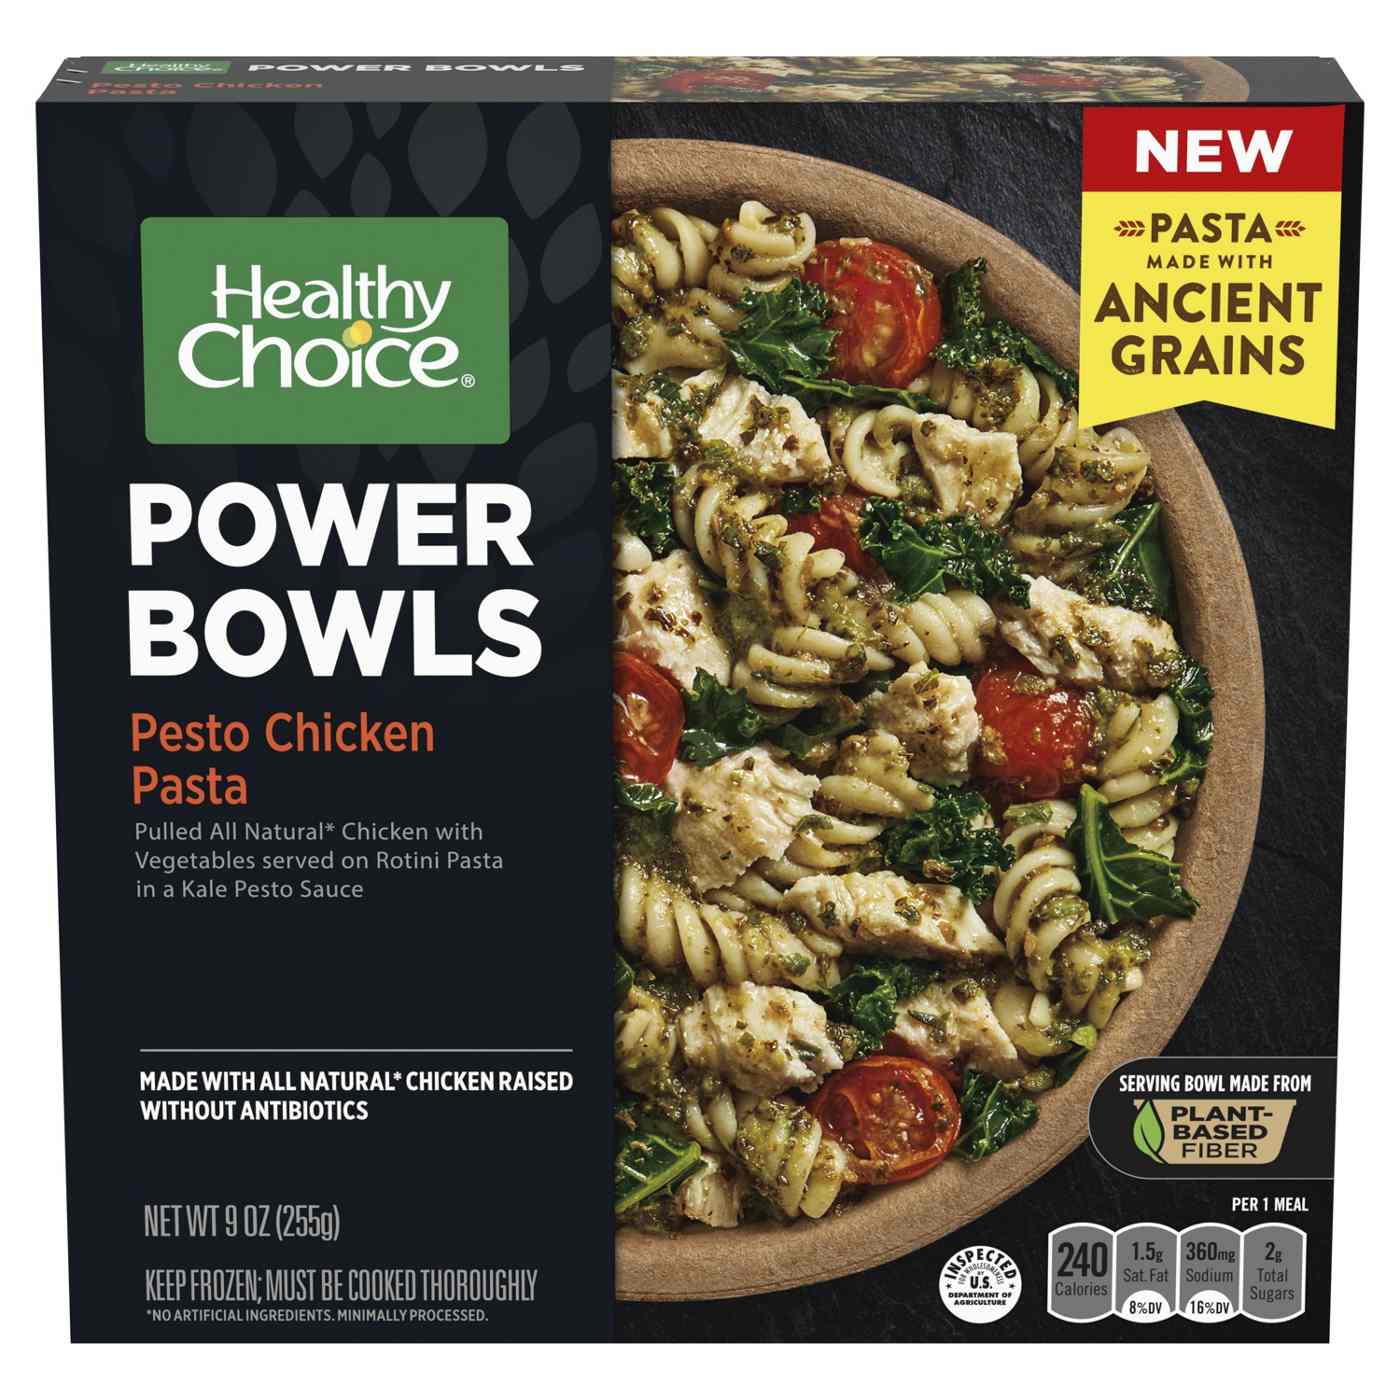 Healthy Choice Power Bowls Pesto Chicken Pasta Frozen Meal; image 1 of 4